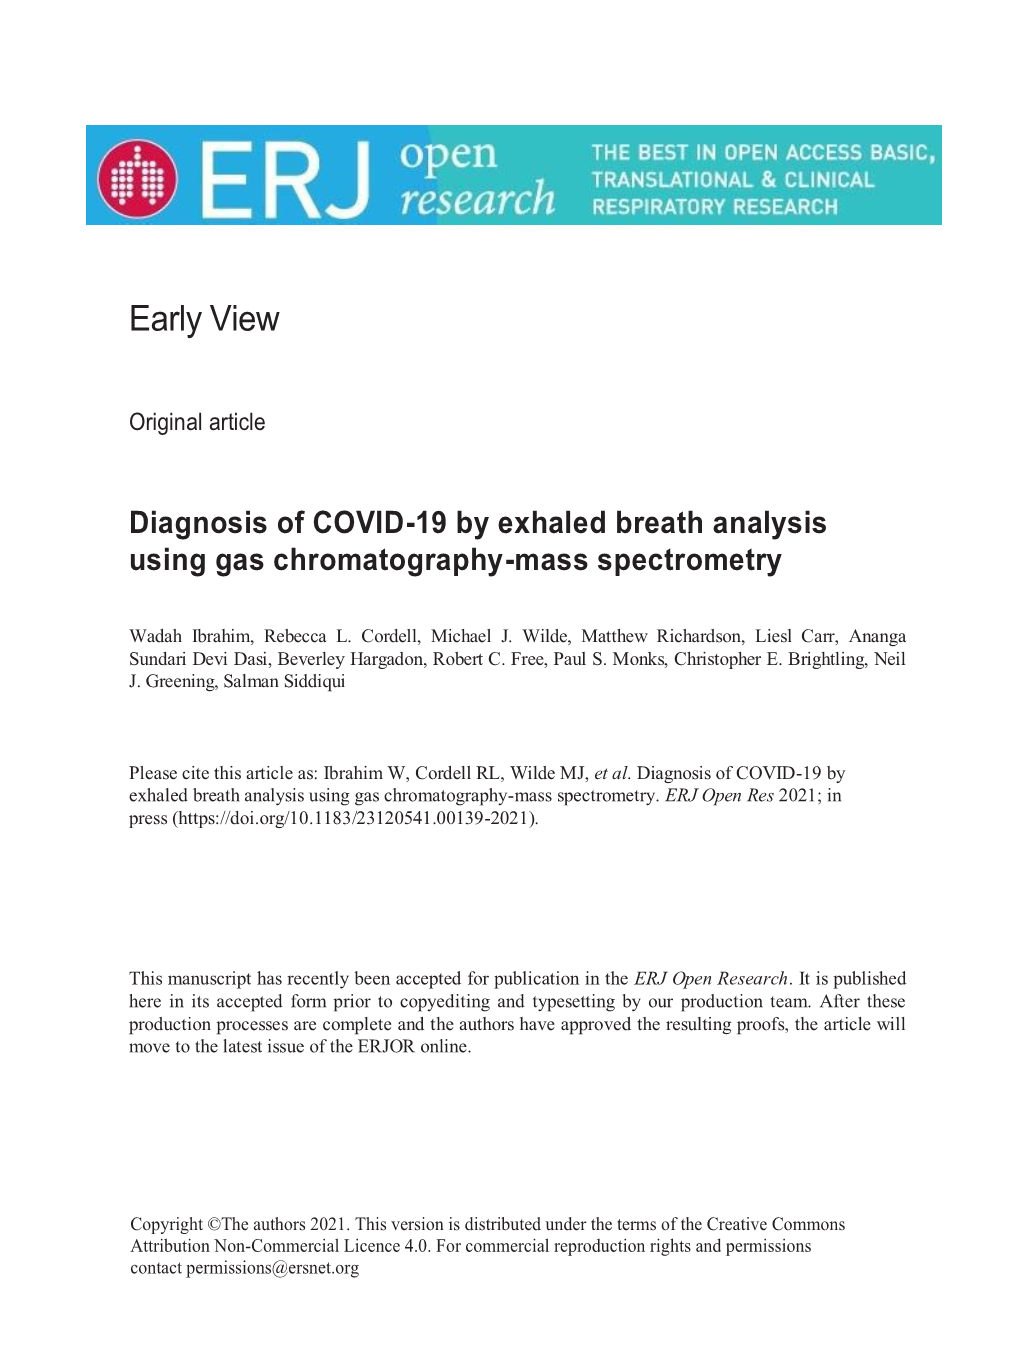 Diagnosis of COVID-19 by Exhaled Breath Analysis Using Gas Chromatography-Mass Spectrometry